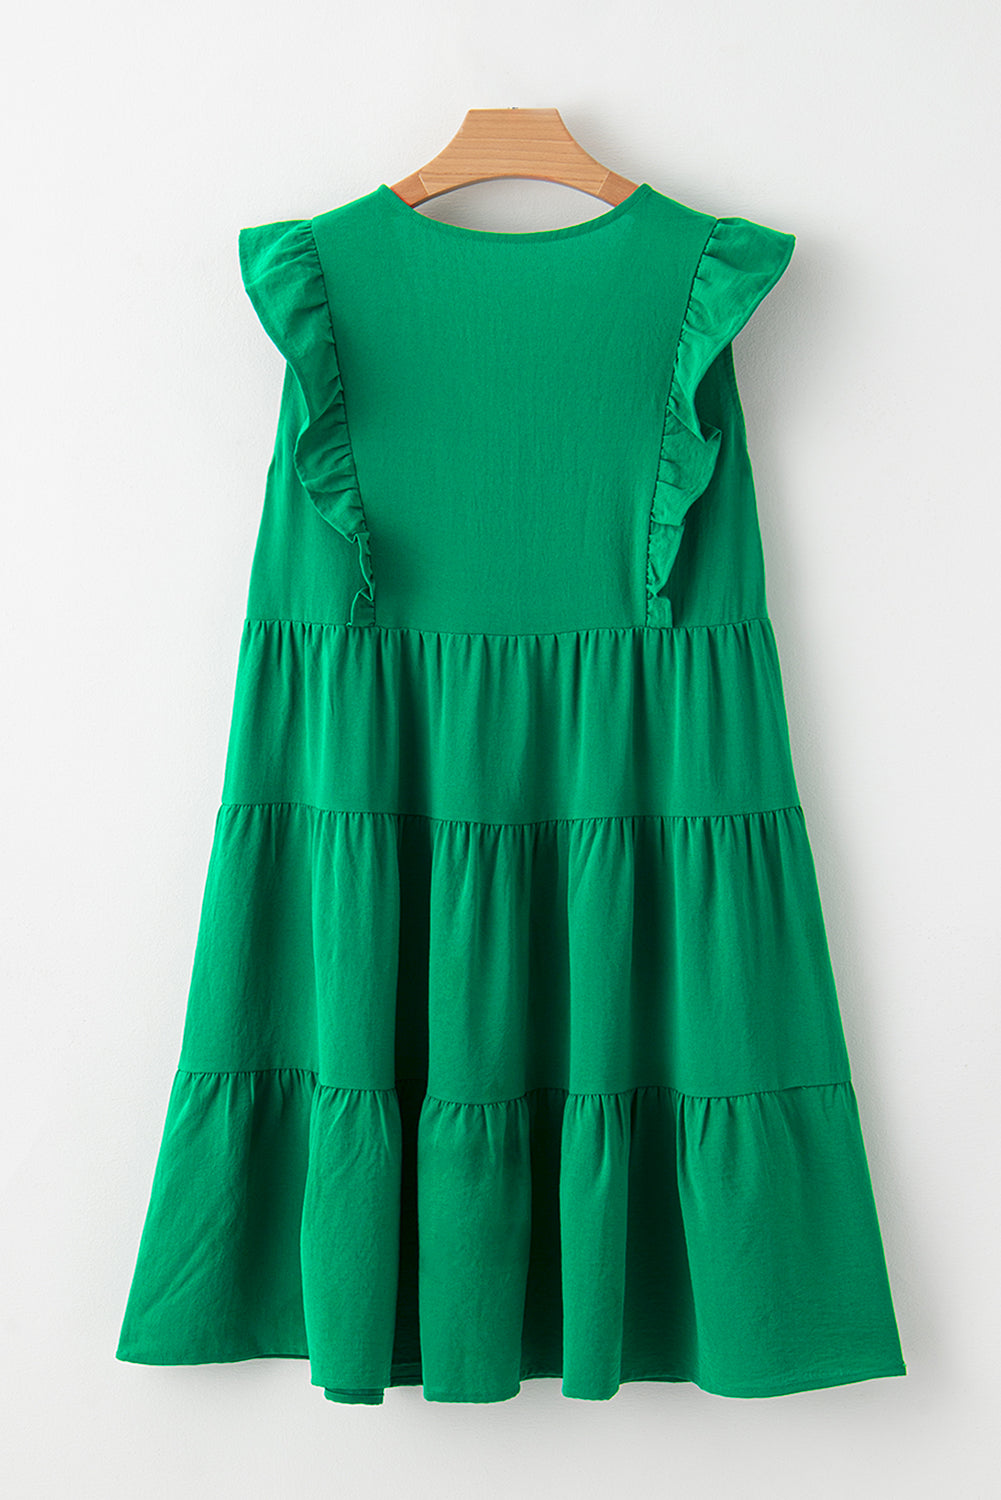 Bright Green Solid Color V Neck Ruffle Tiered Mini Dress Blue Zone Planet